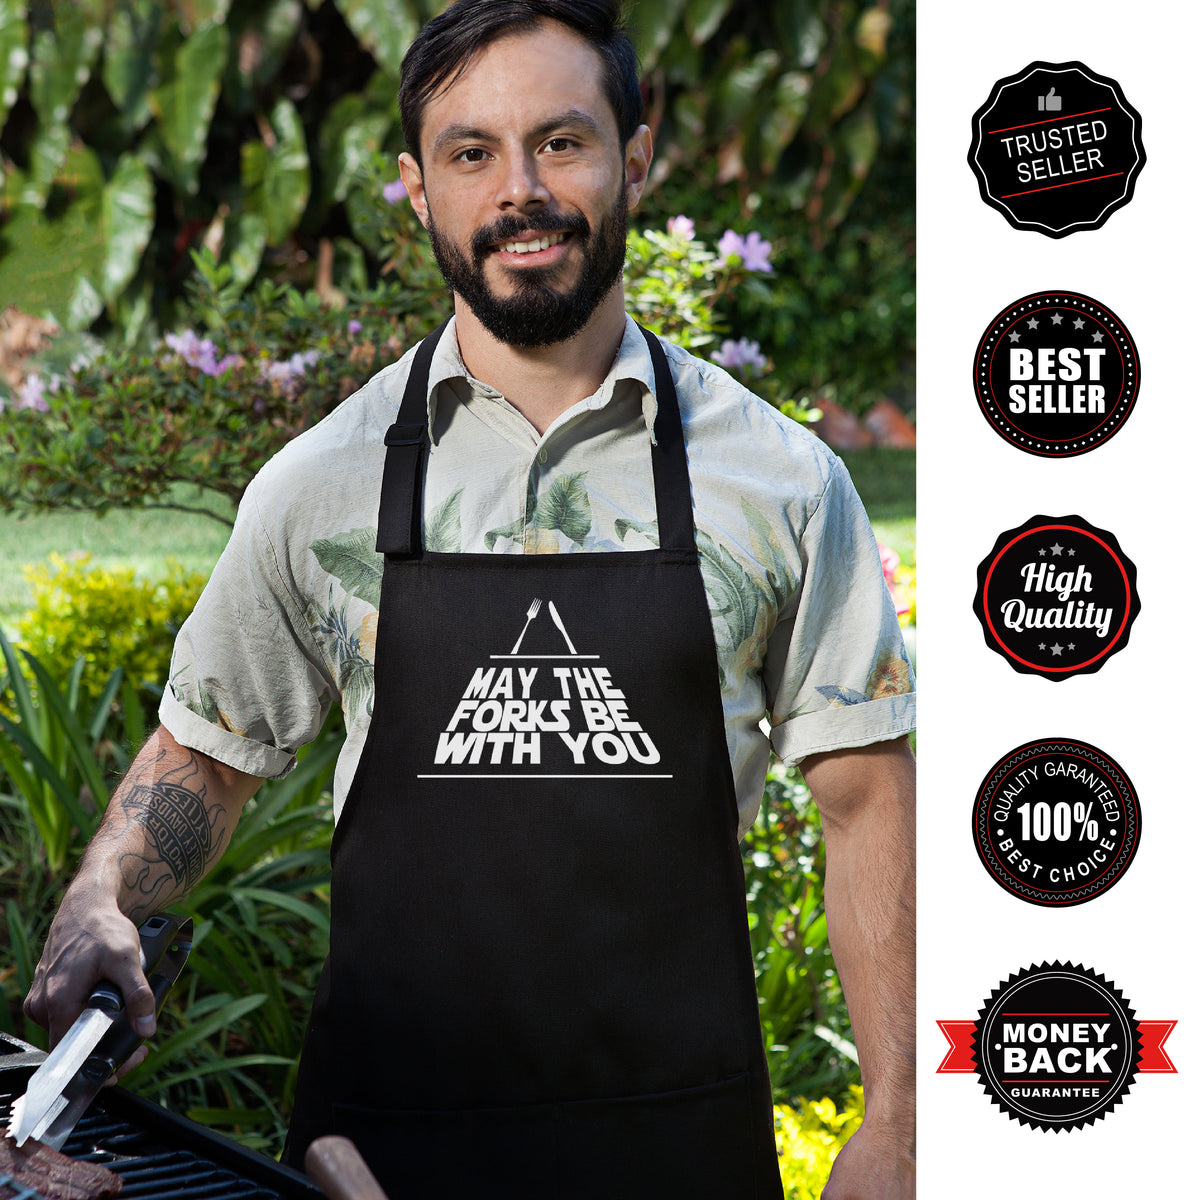  Famnosta Funny Aprons for Men,MAY THE FORK BE WITH YOU